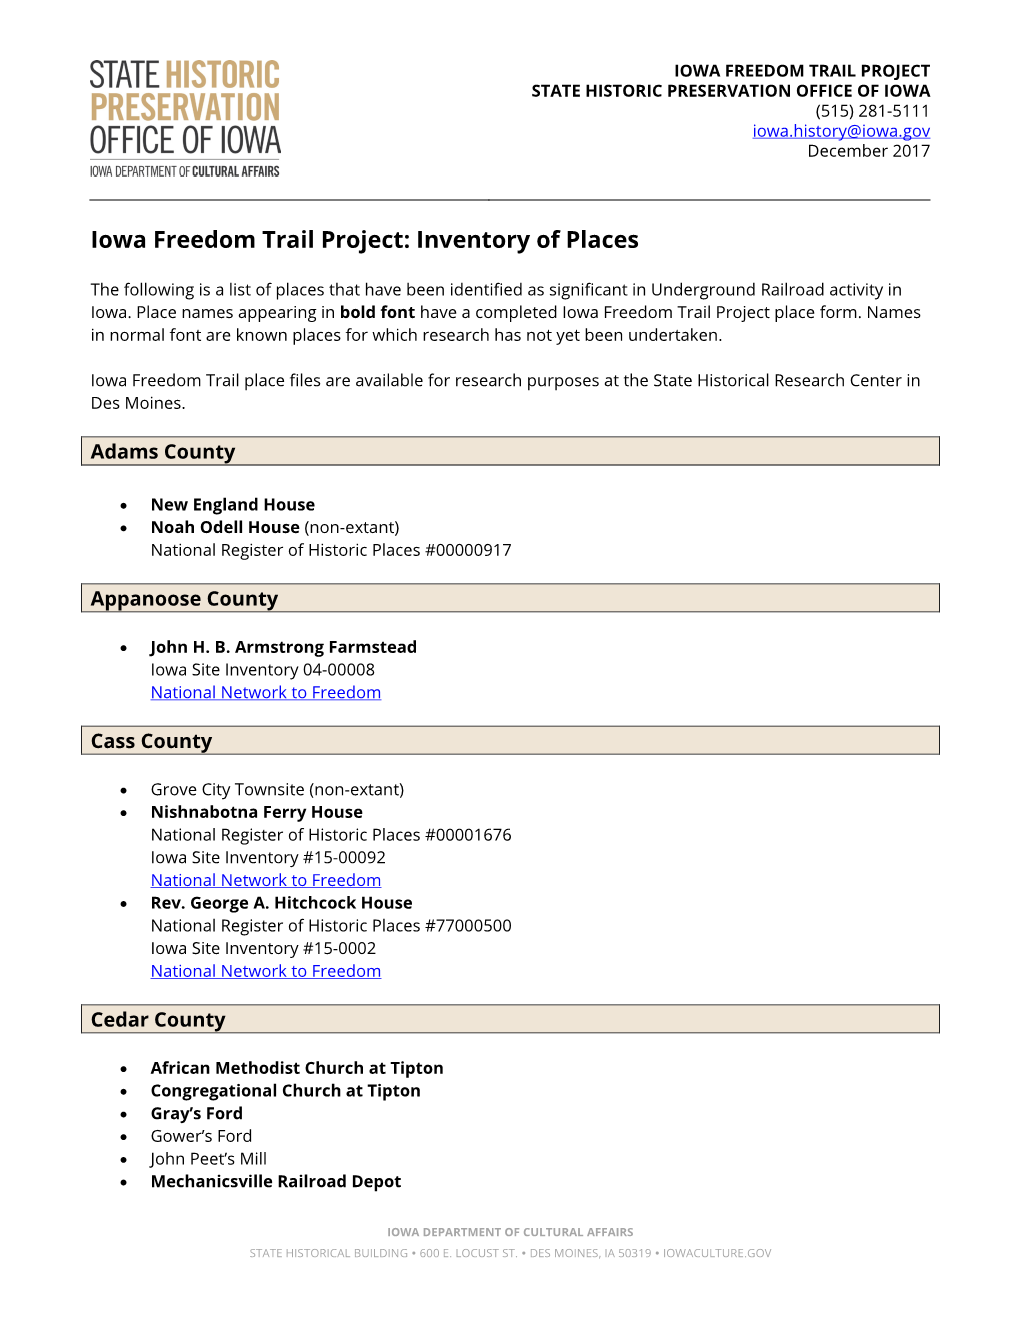 Iowa Freedom Trail Project: Inventory of Places